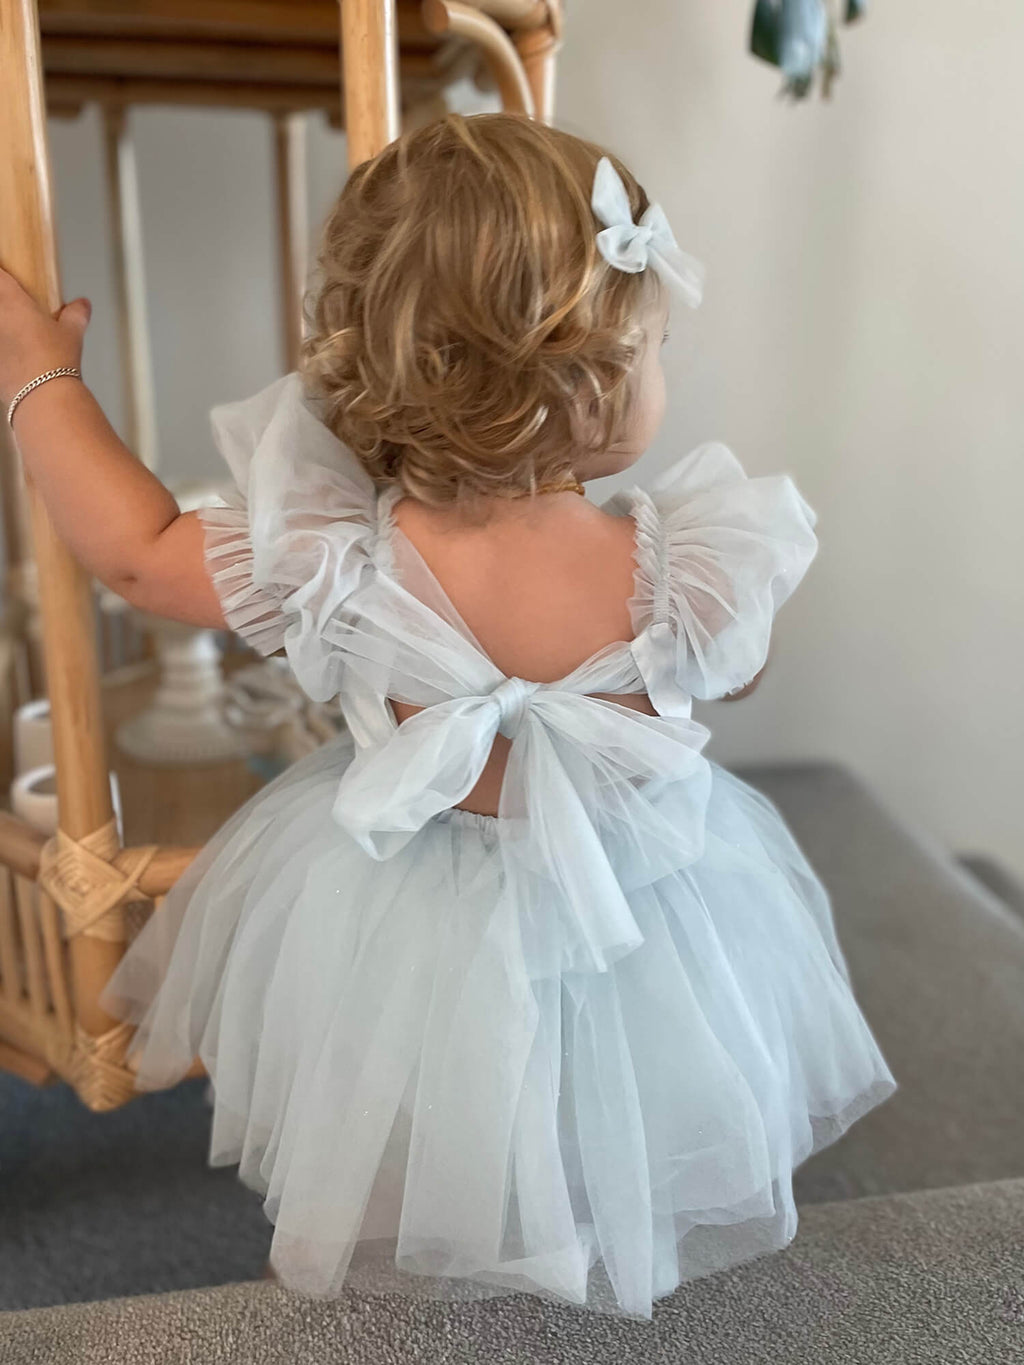 Gabrielle baby flower girl dress is worn by a toddler, in colour dusty blue, along with matching tulle pigtail bows in her hair.